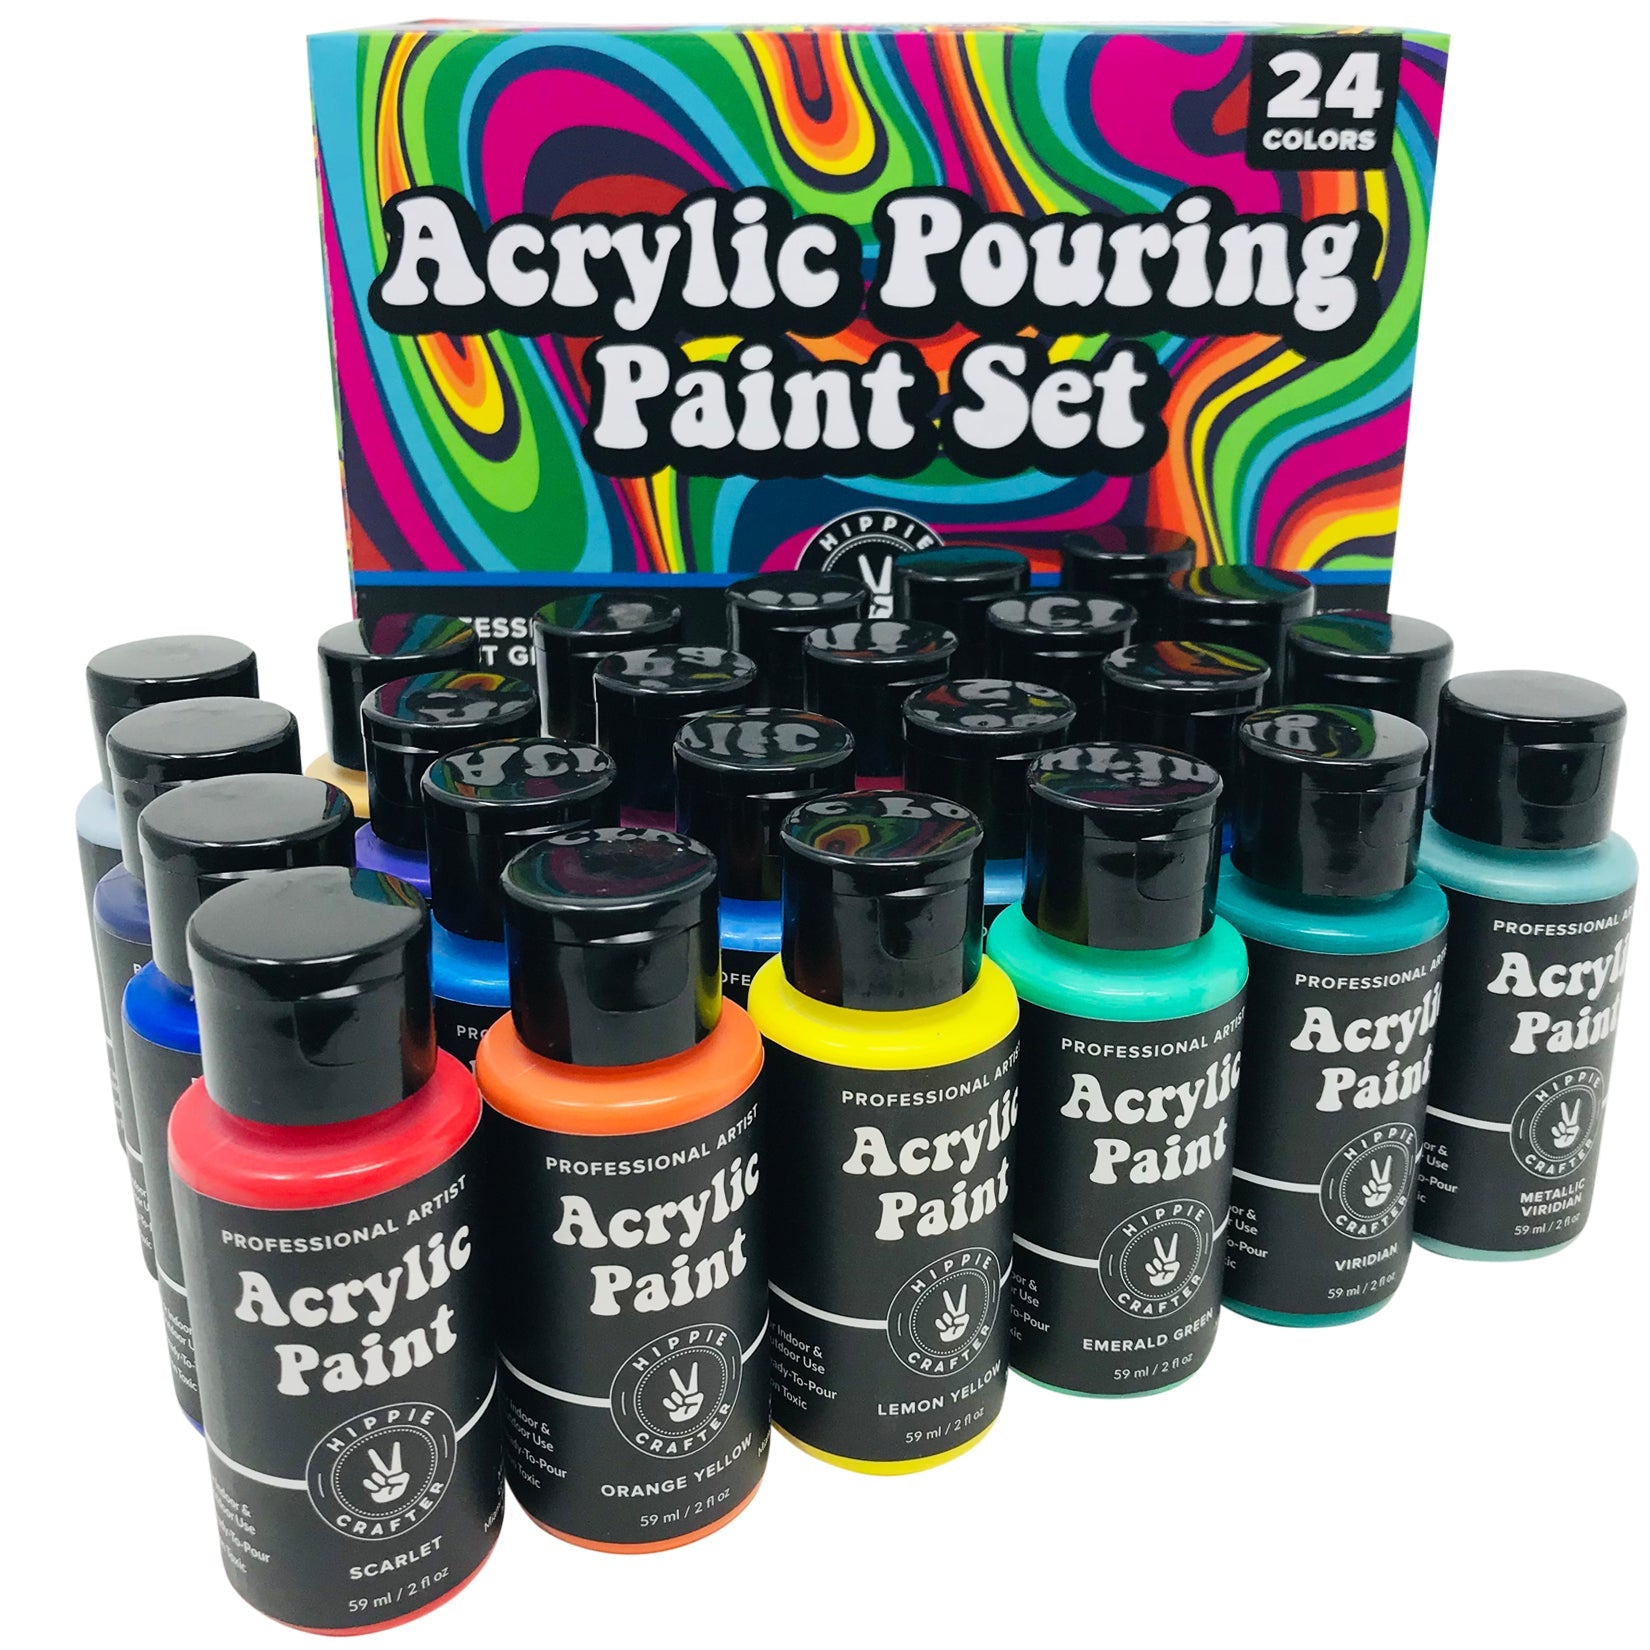 Acrylic Paint Pouring Craft for beginners